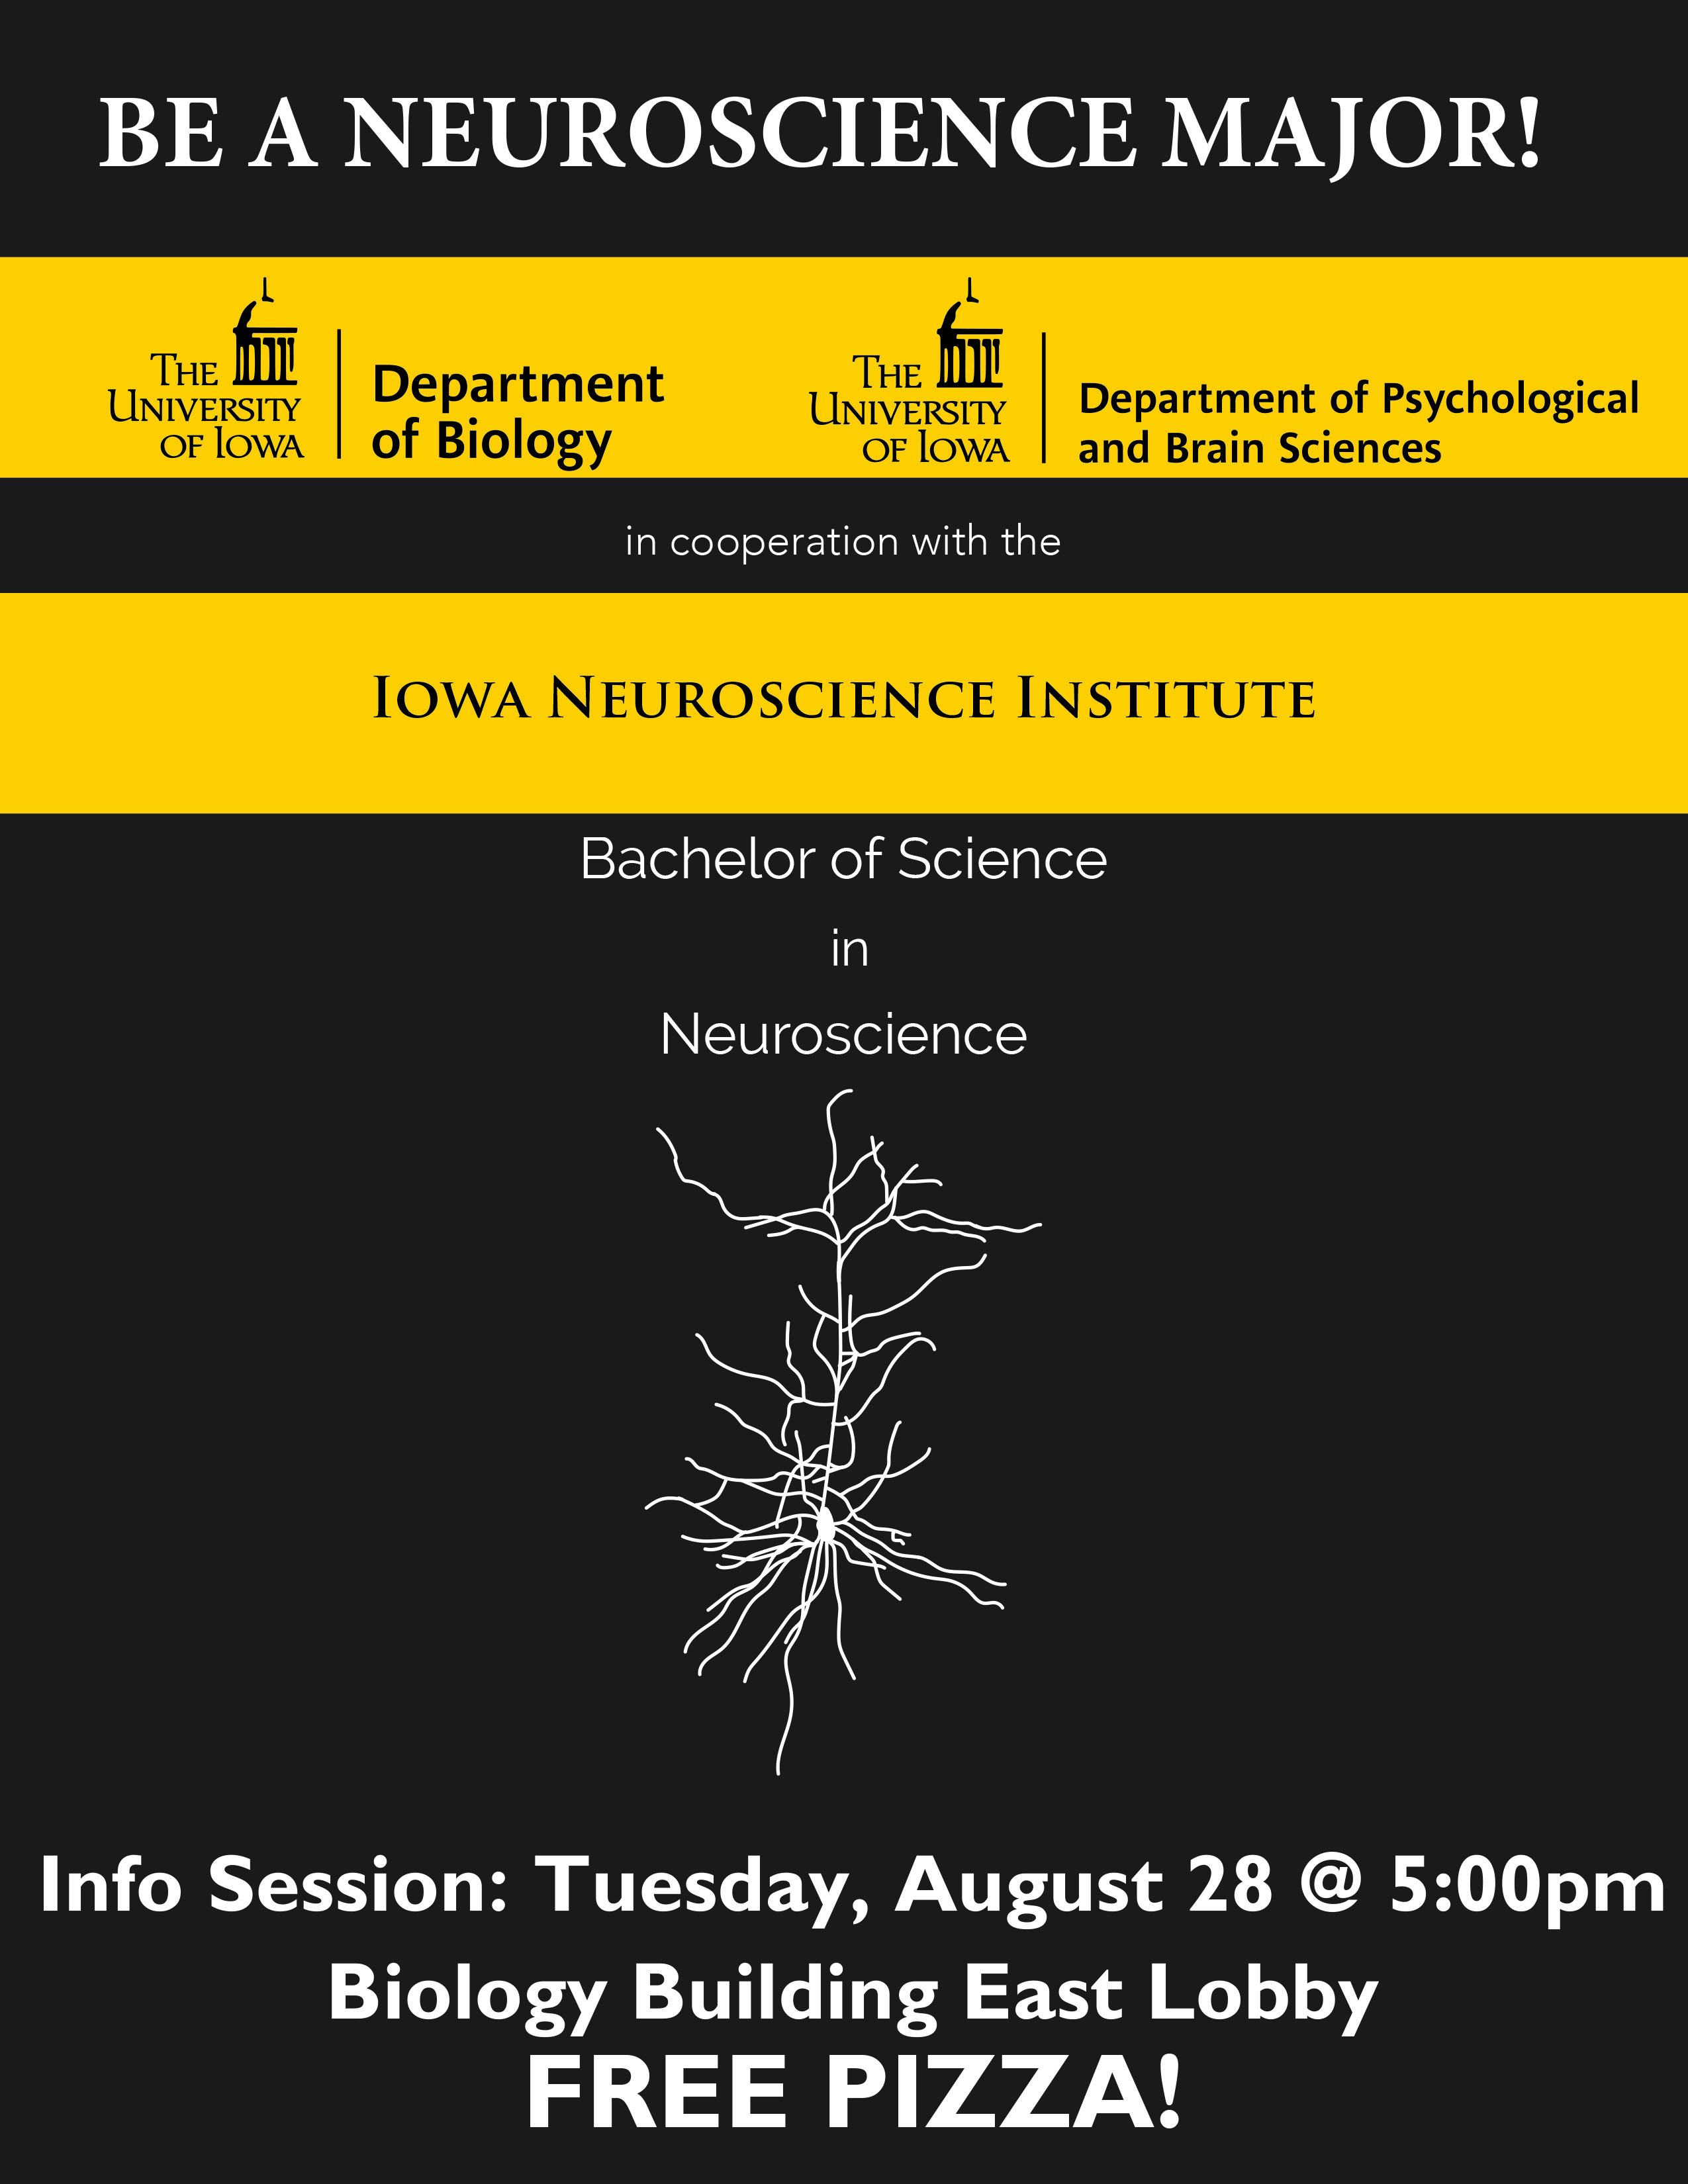 Neuroscience Info Session/Open House promotional image